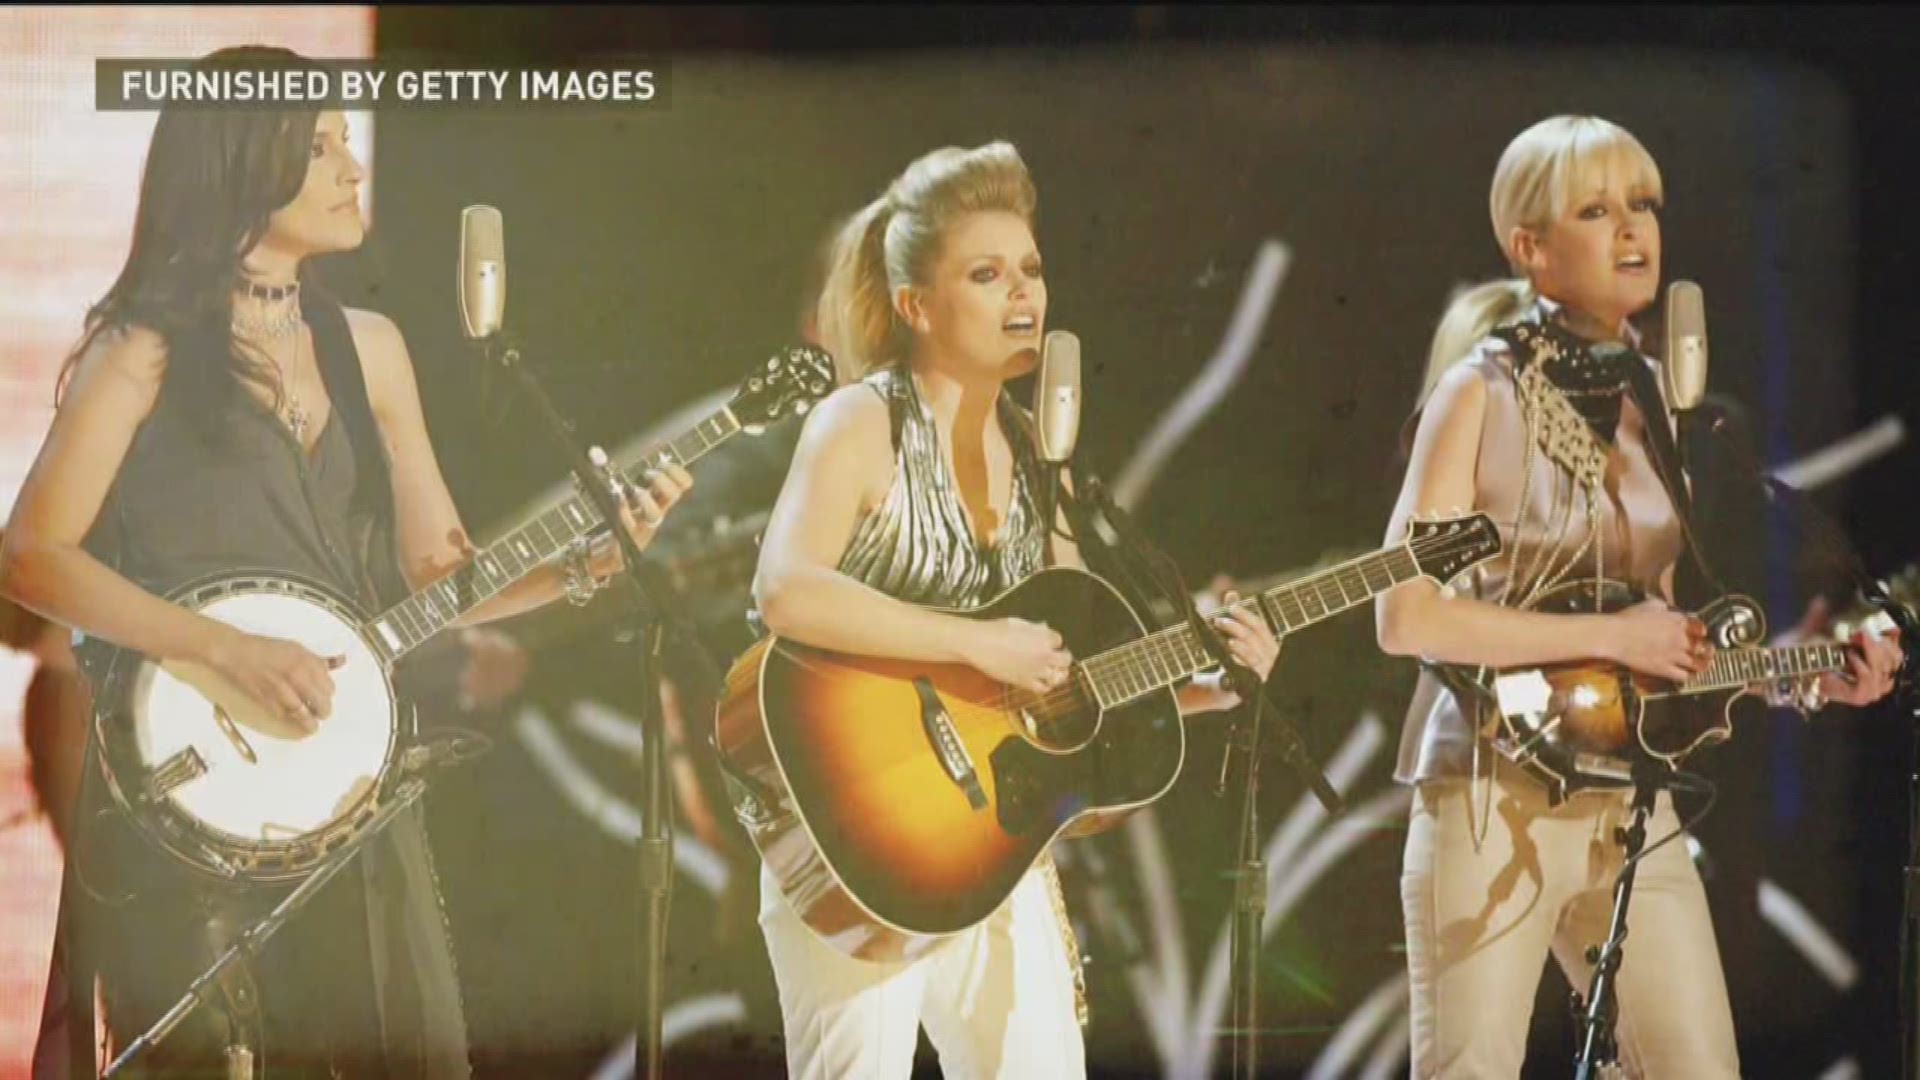 What happened to the Dixie Chicks?